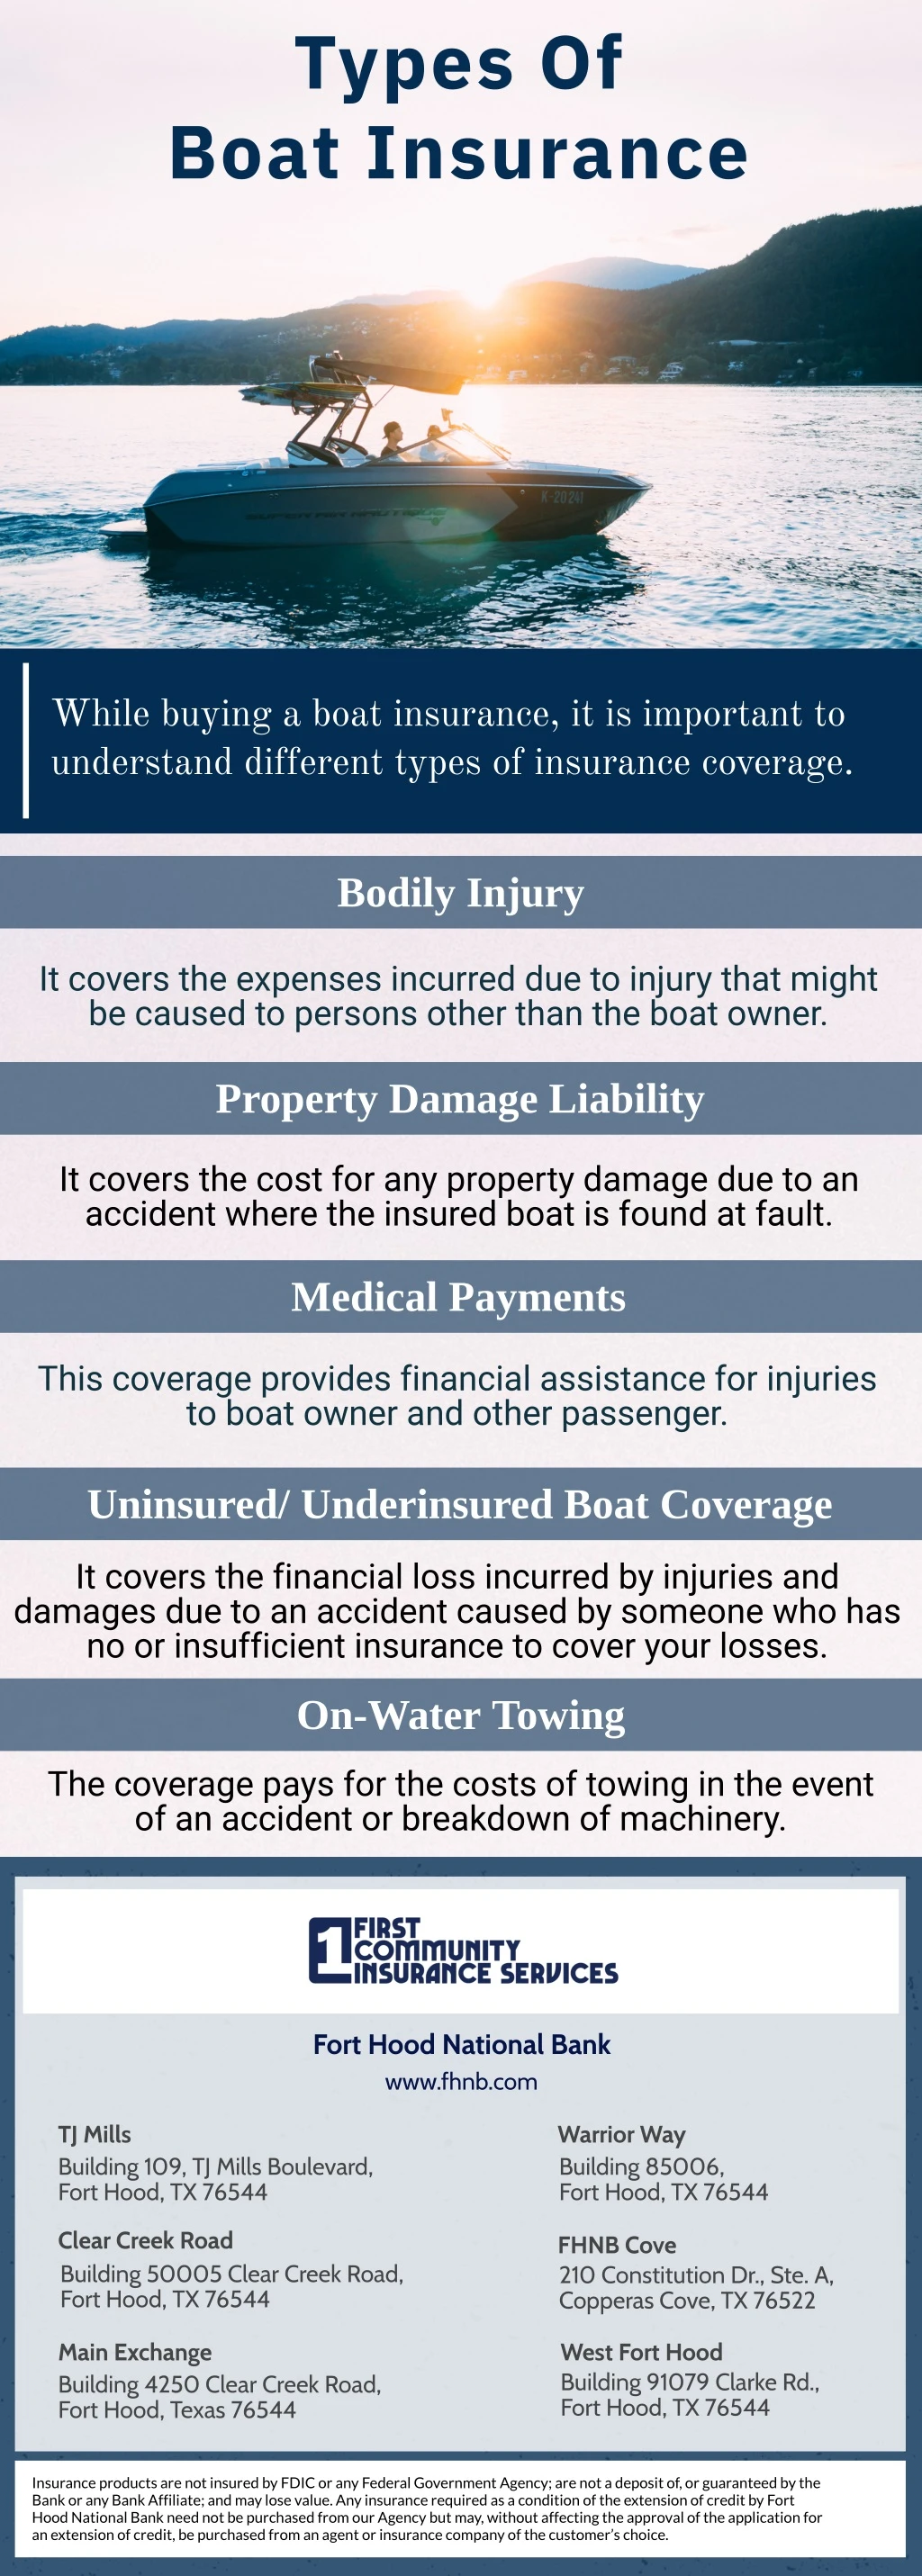 types of boat insurance